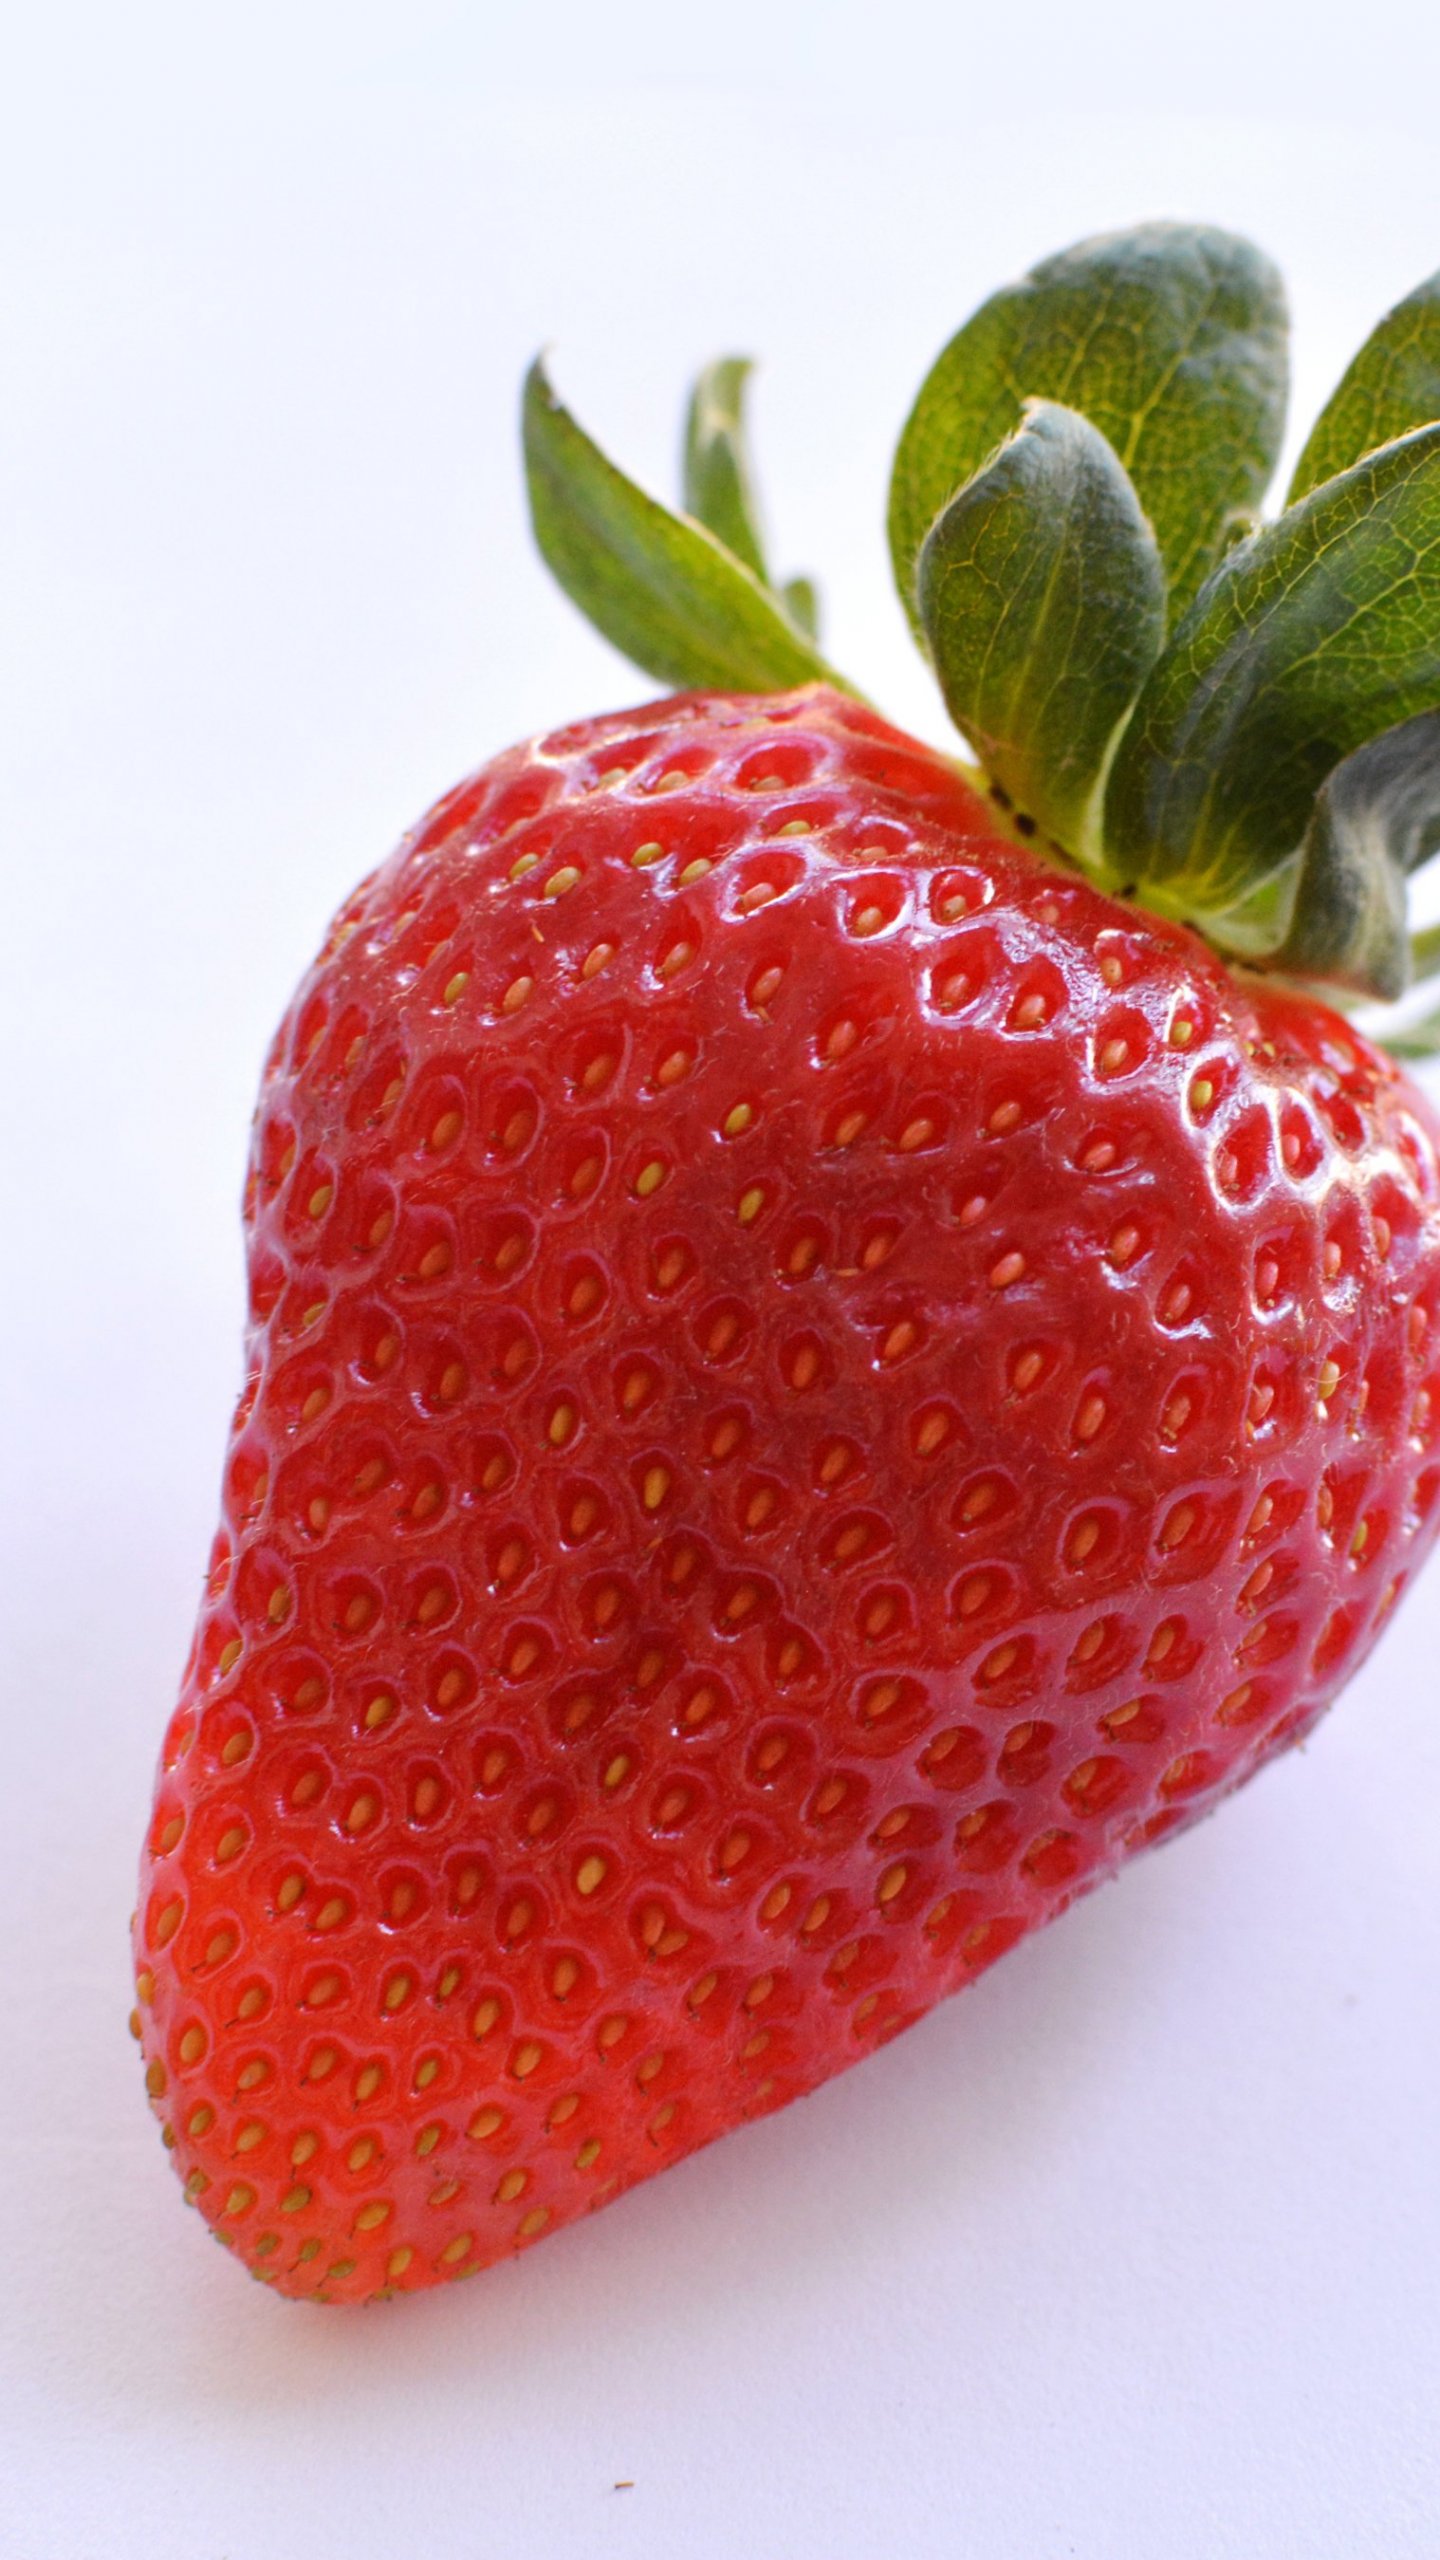 Strawberry Mobile Phone Wallpaper Images Free Download on Lovepik   400297843